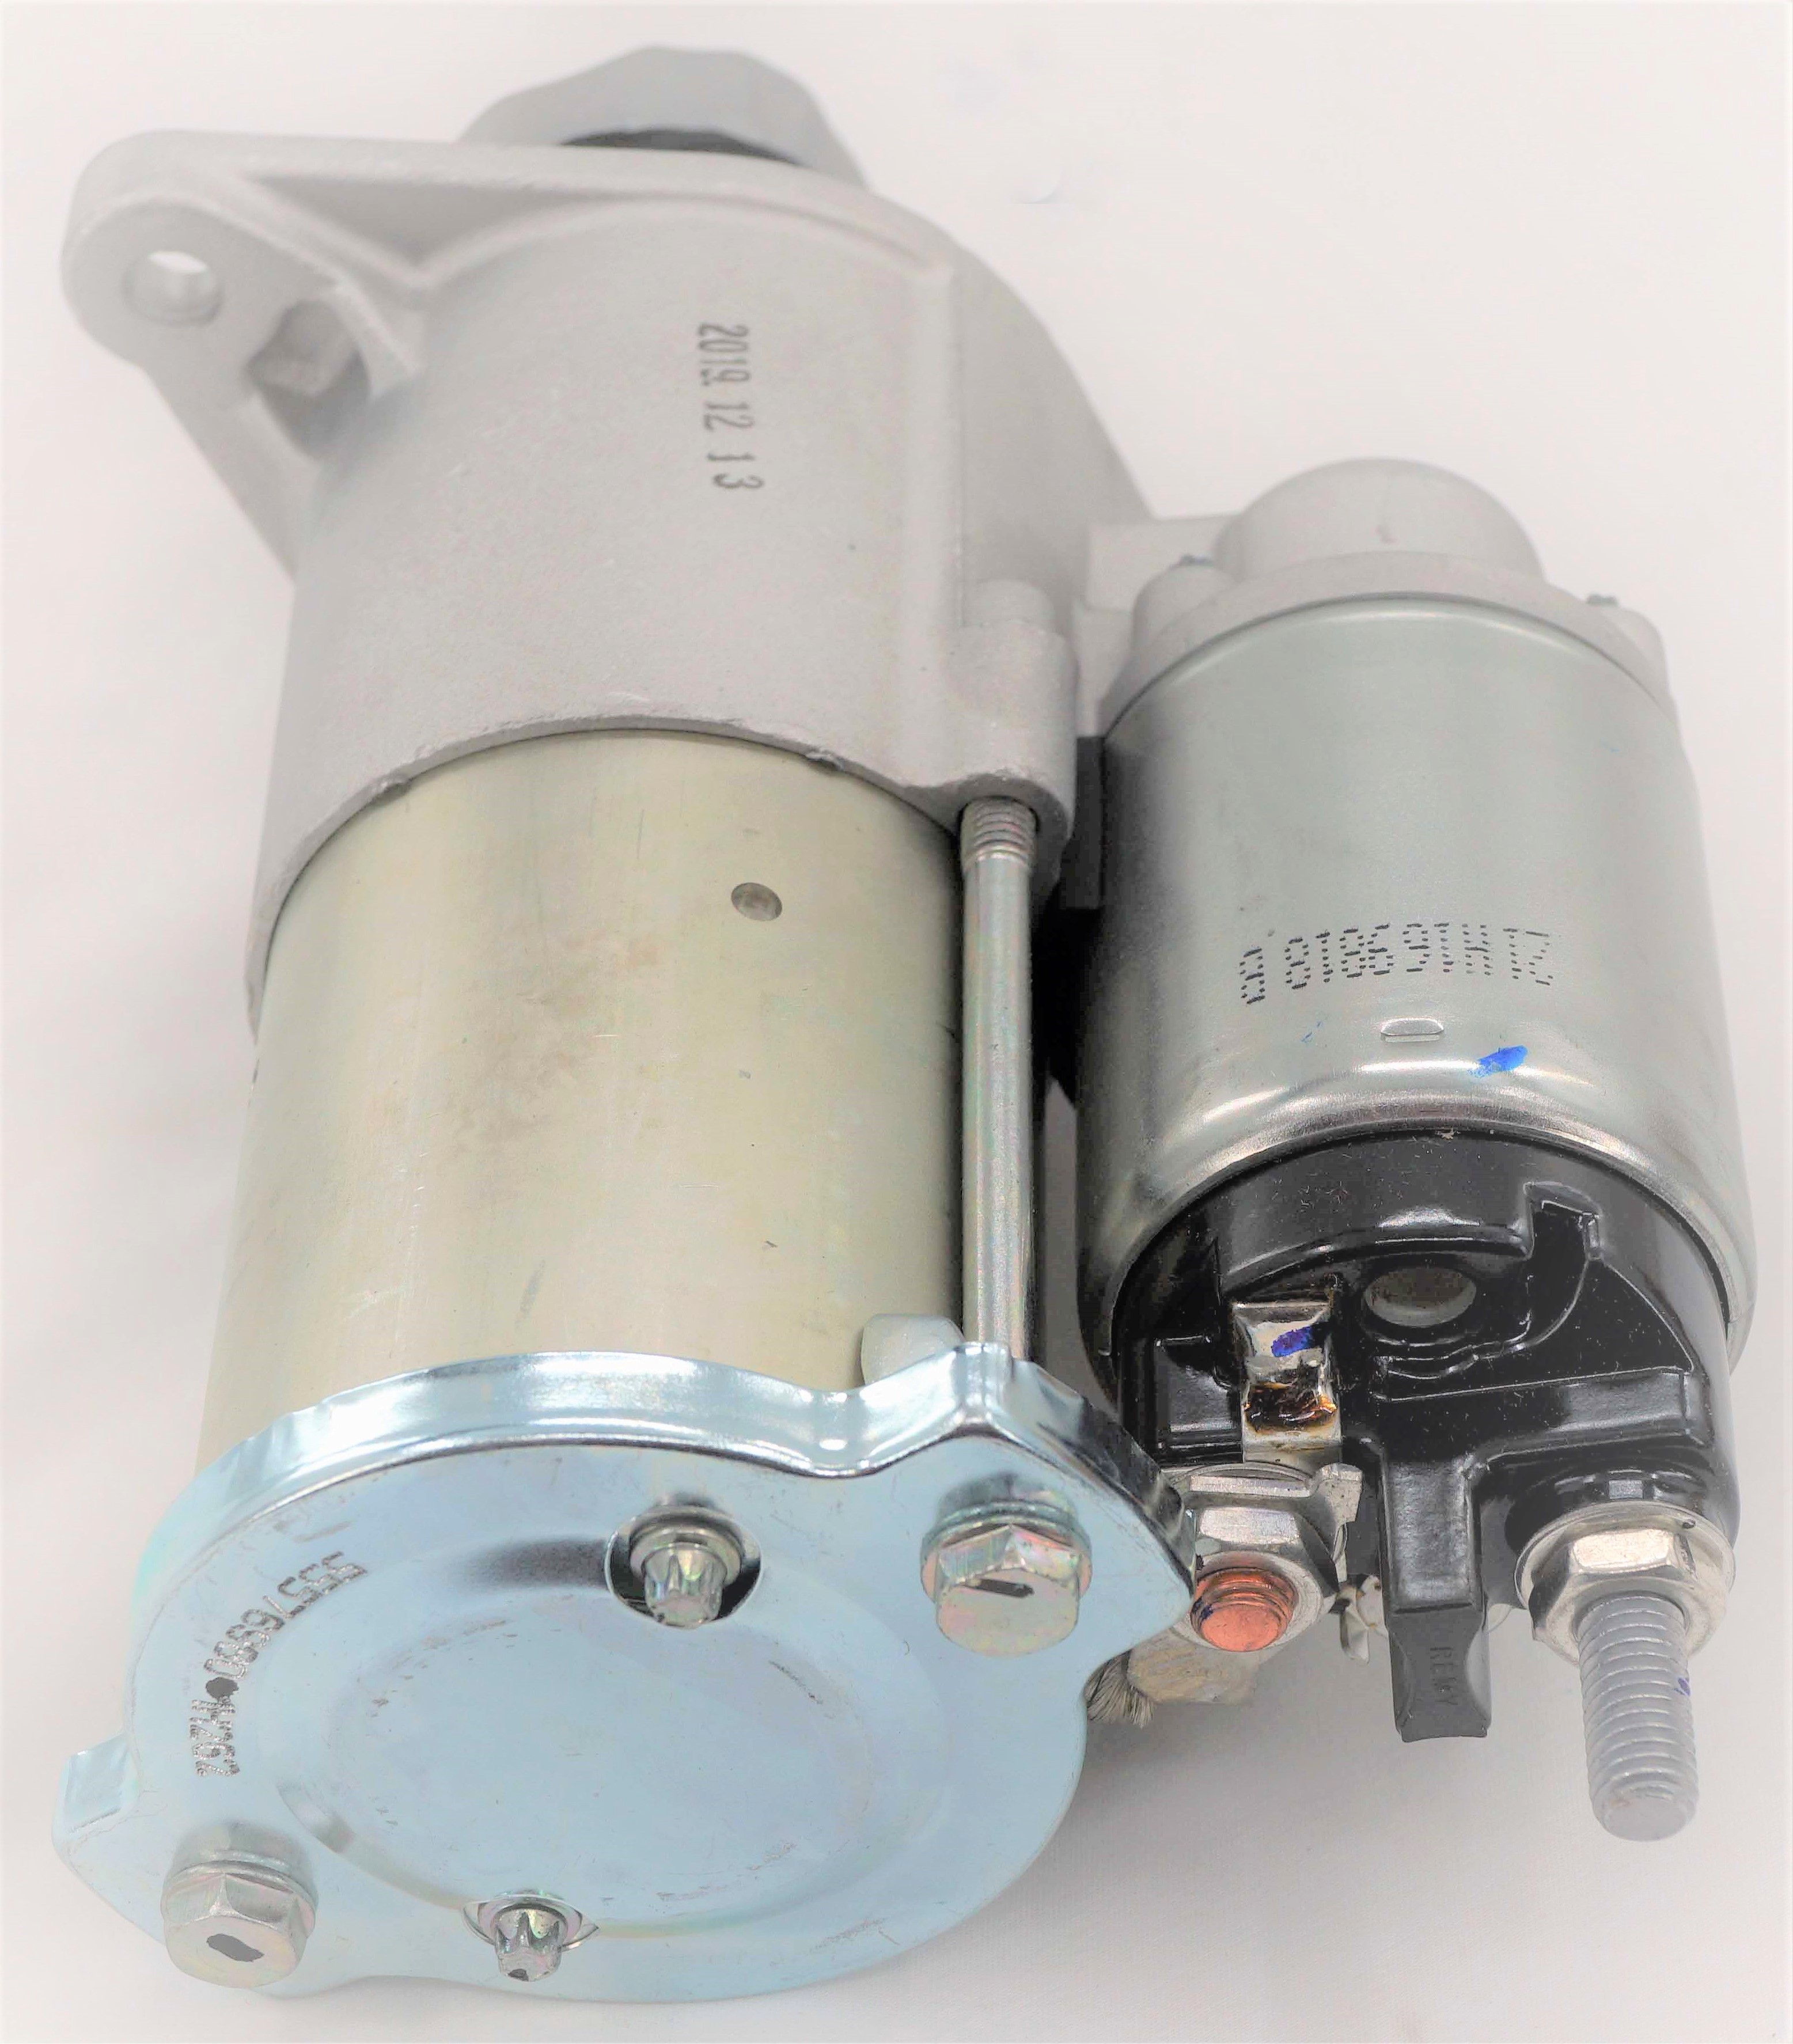 Genuine OEM 55576980 GM Starter Motor Fits Chevy Cruze and Sonic - image 2